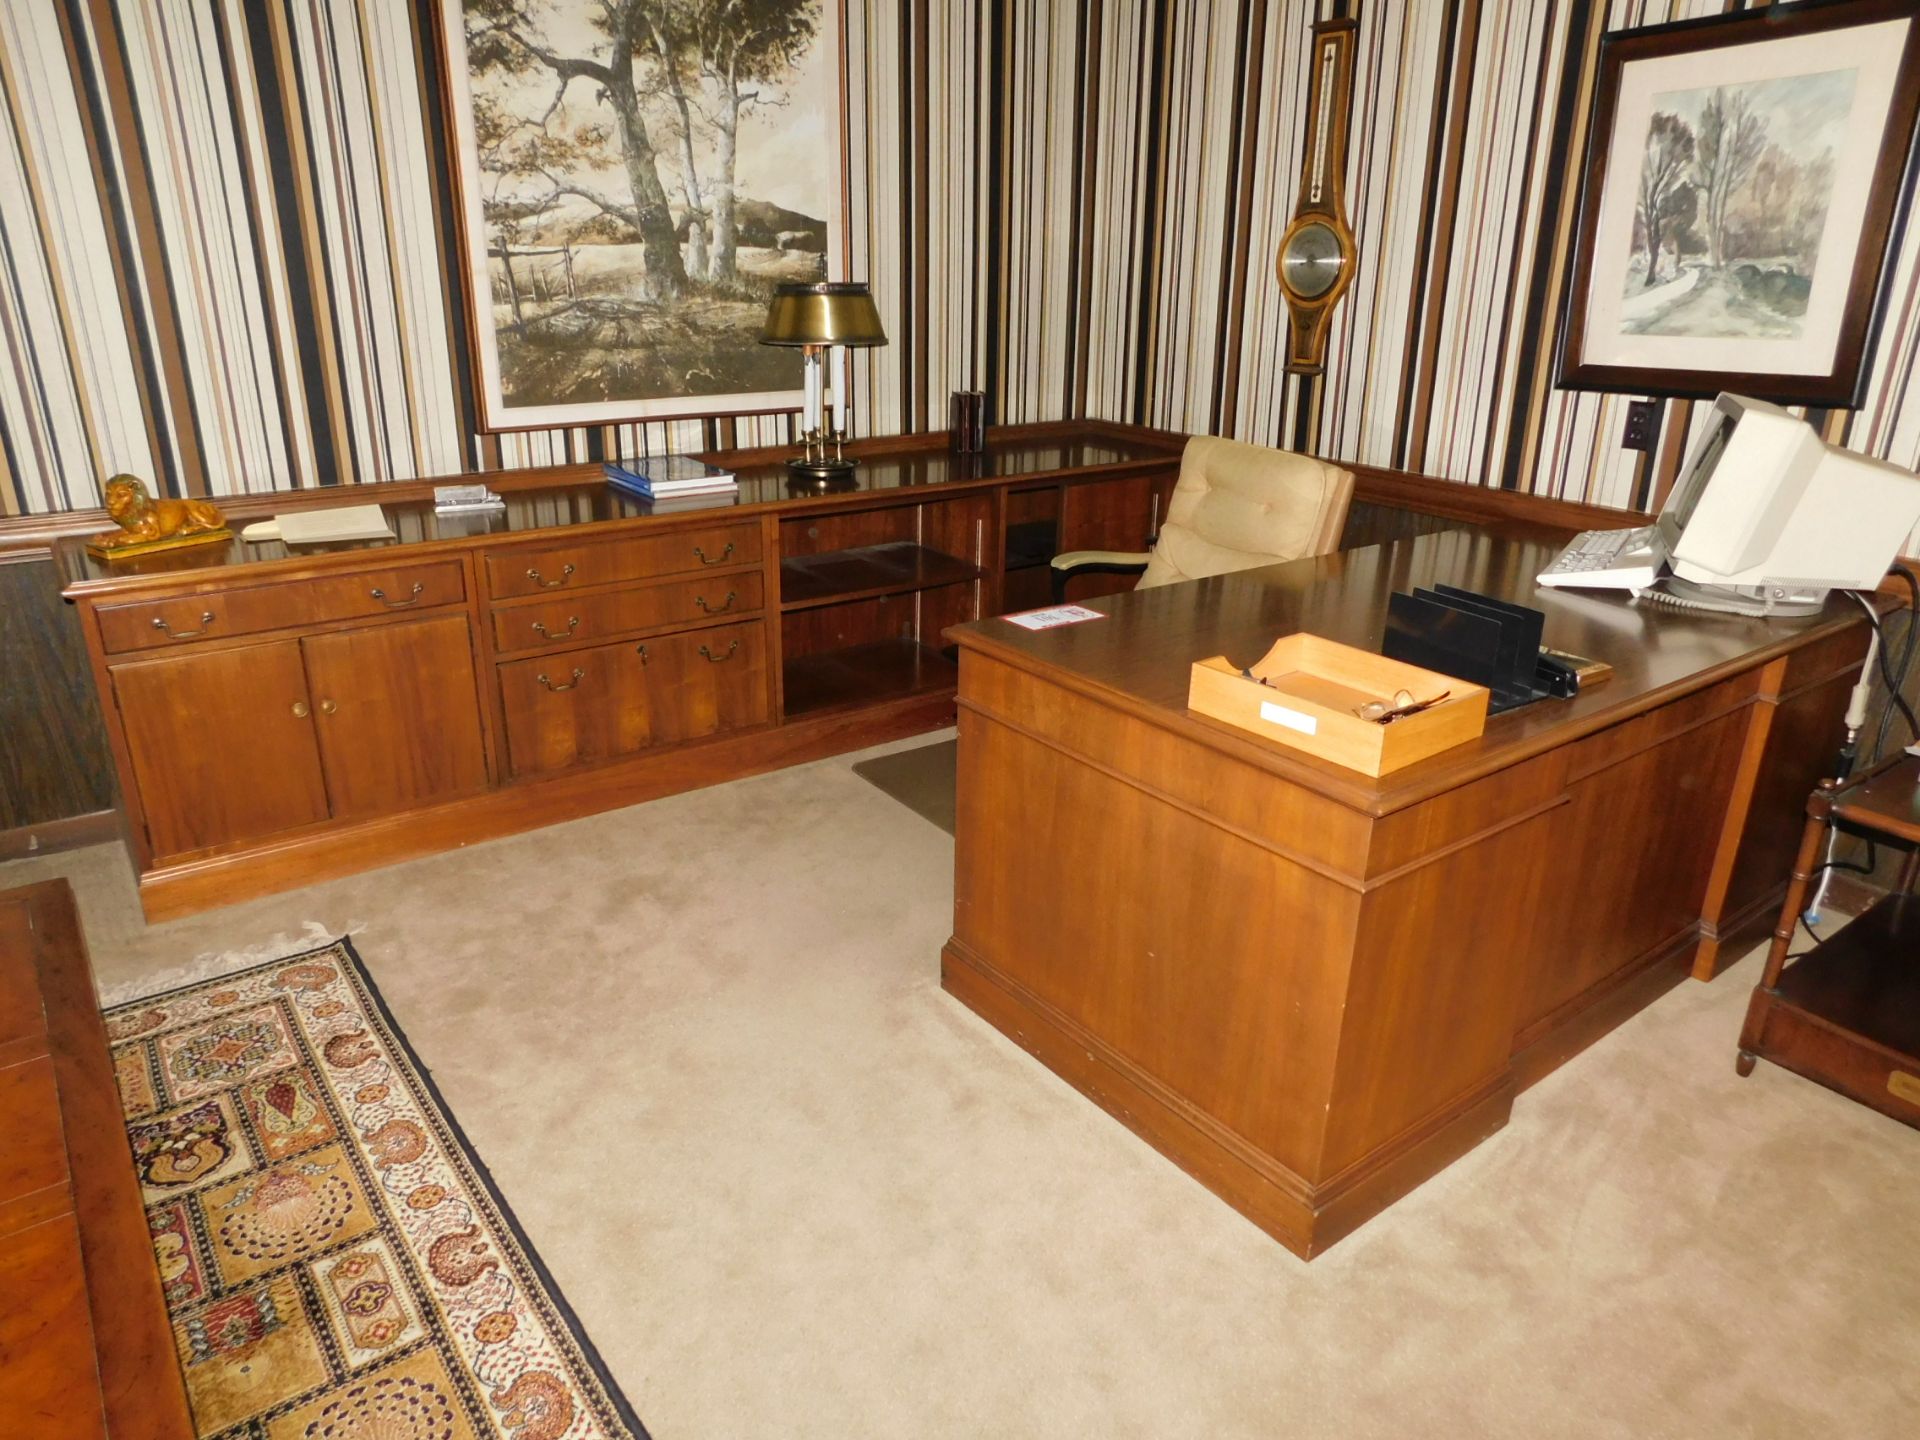 Wooden Double Post Executive Desk and Matching Credenza, Chair on Casters, Decorative Coffee